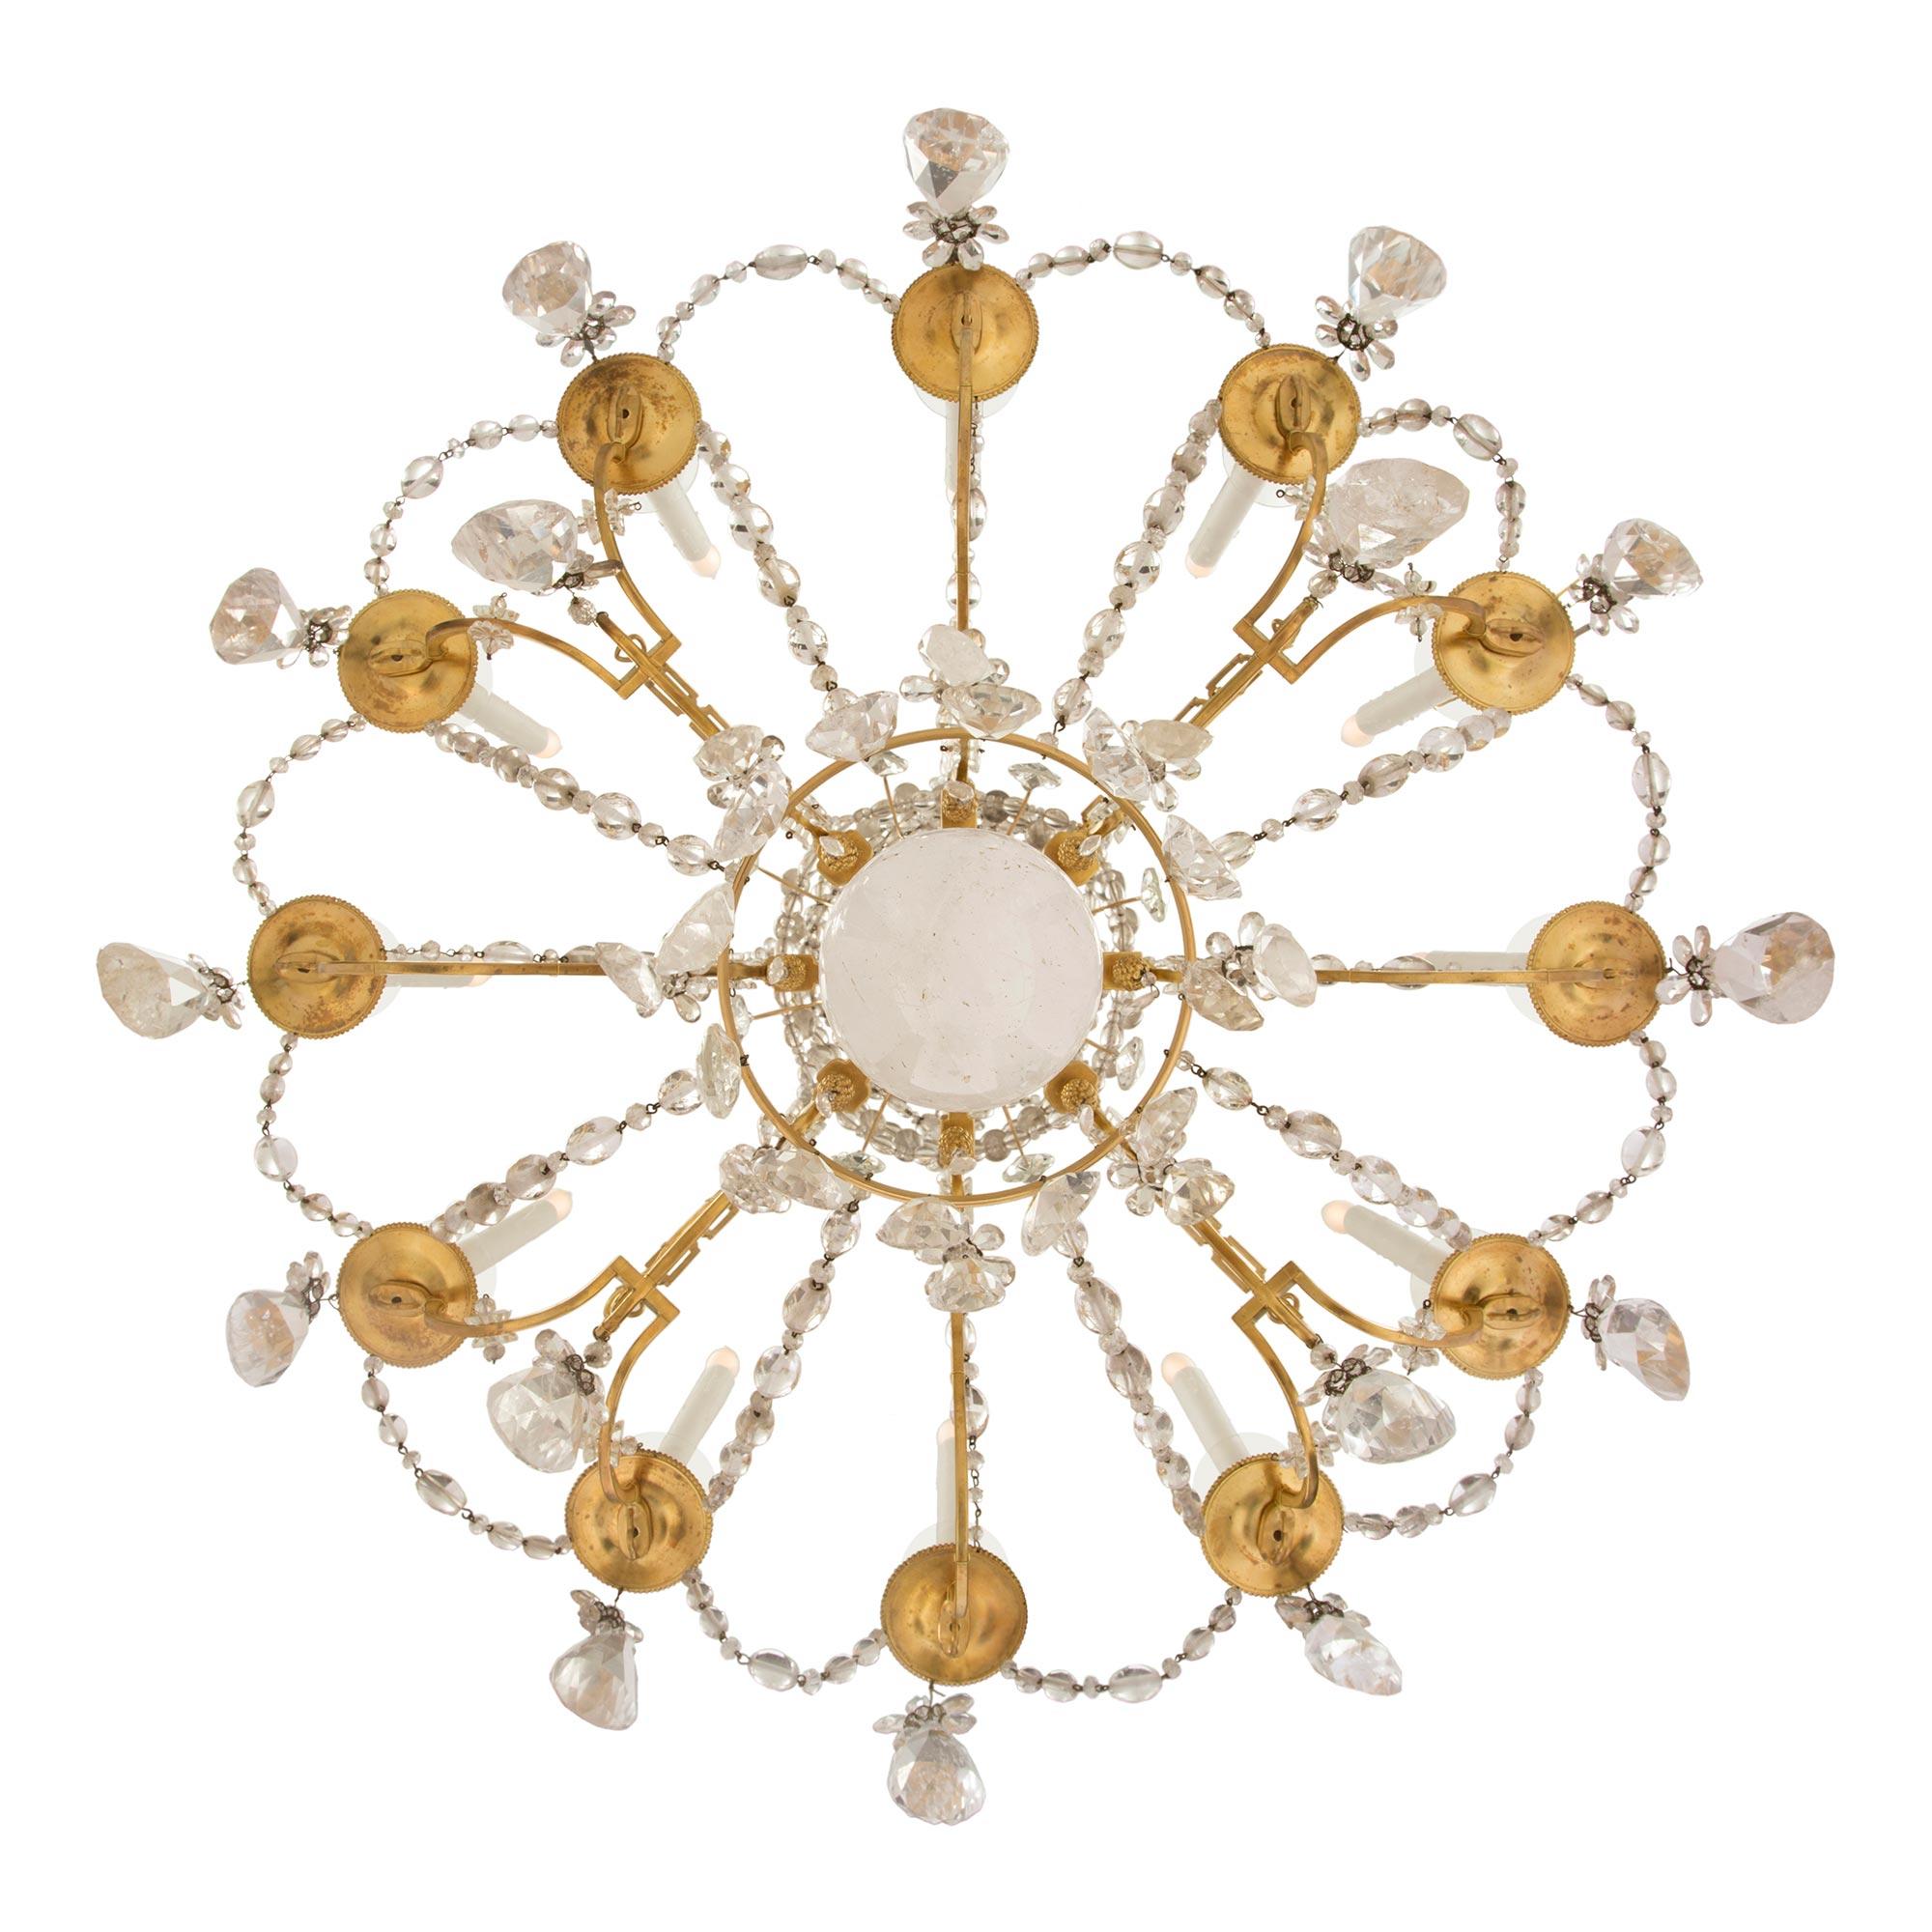 French 19th Century Louis XVI Style Ormolu, Baccarat and Rock Crystal Chandelier For Sale 5